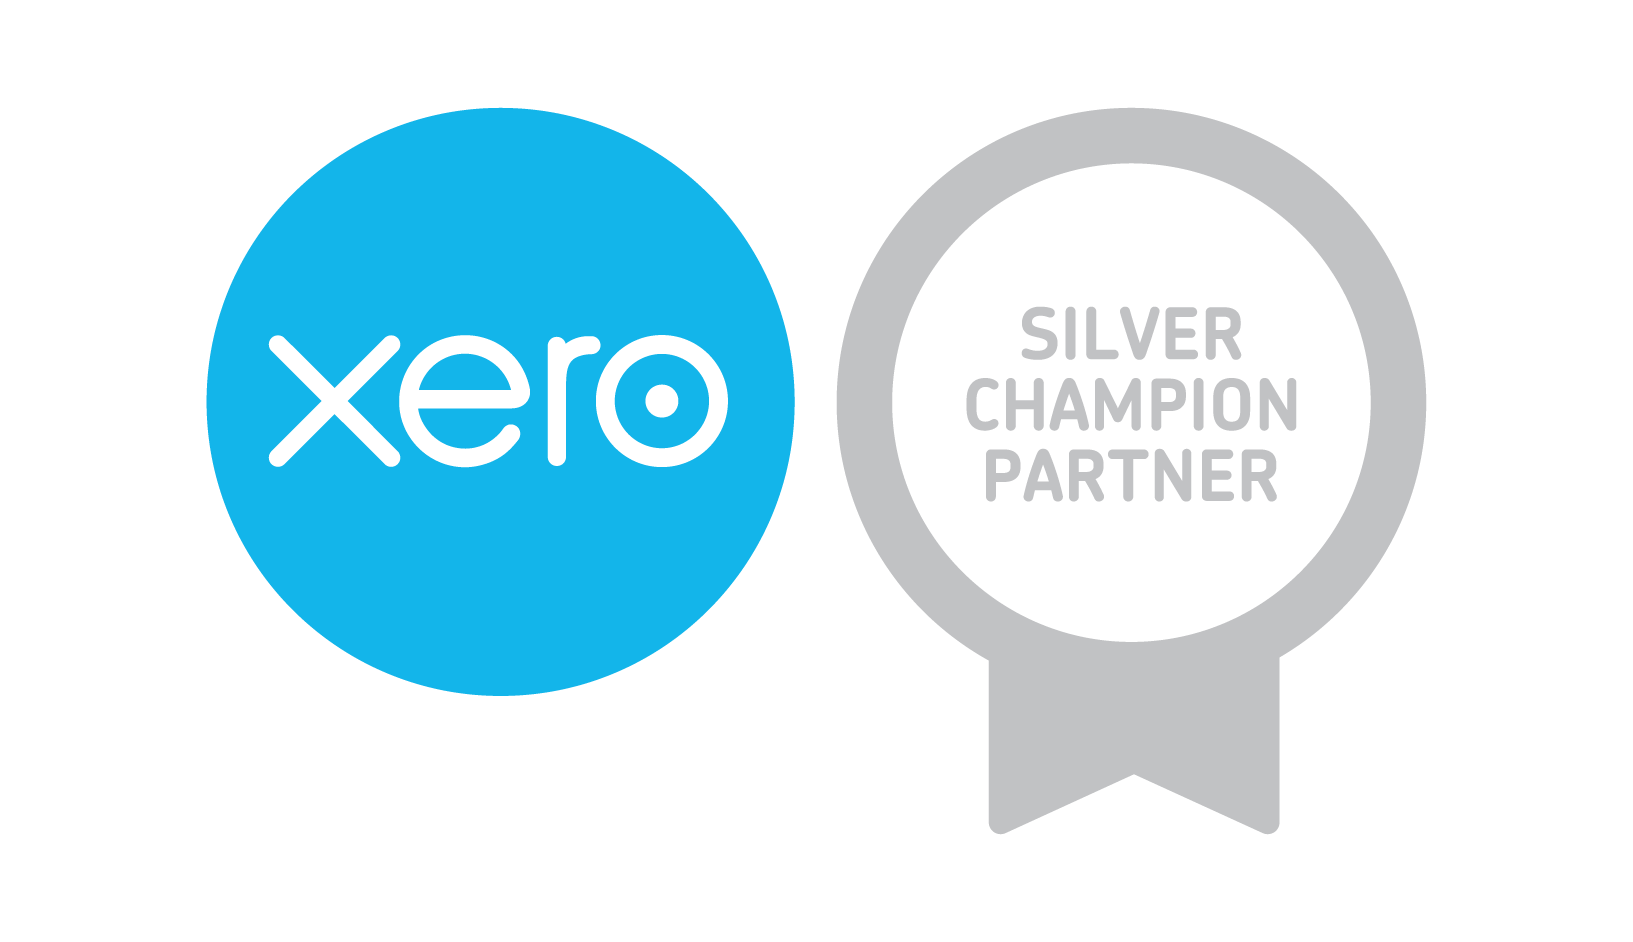 Lime Bookkeeping Inc. partner status is Xero Silver Champion